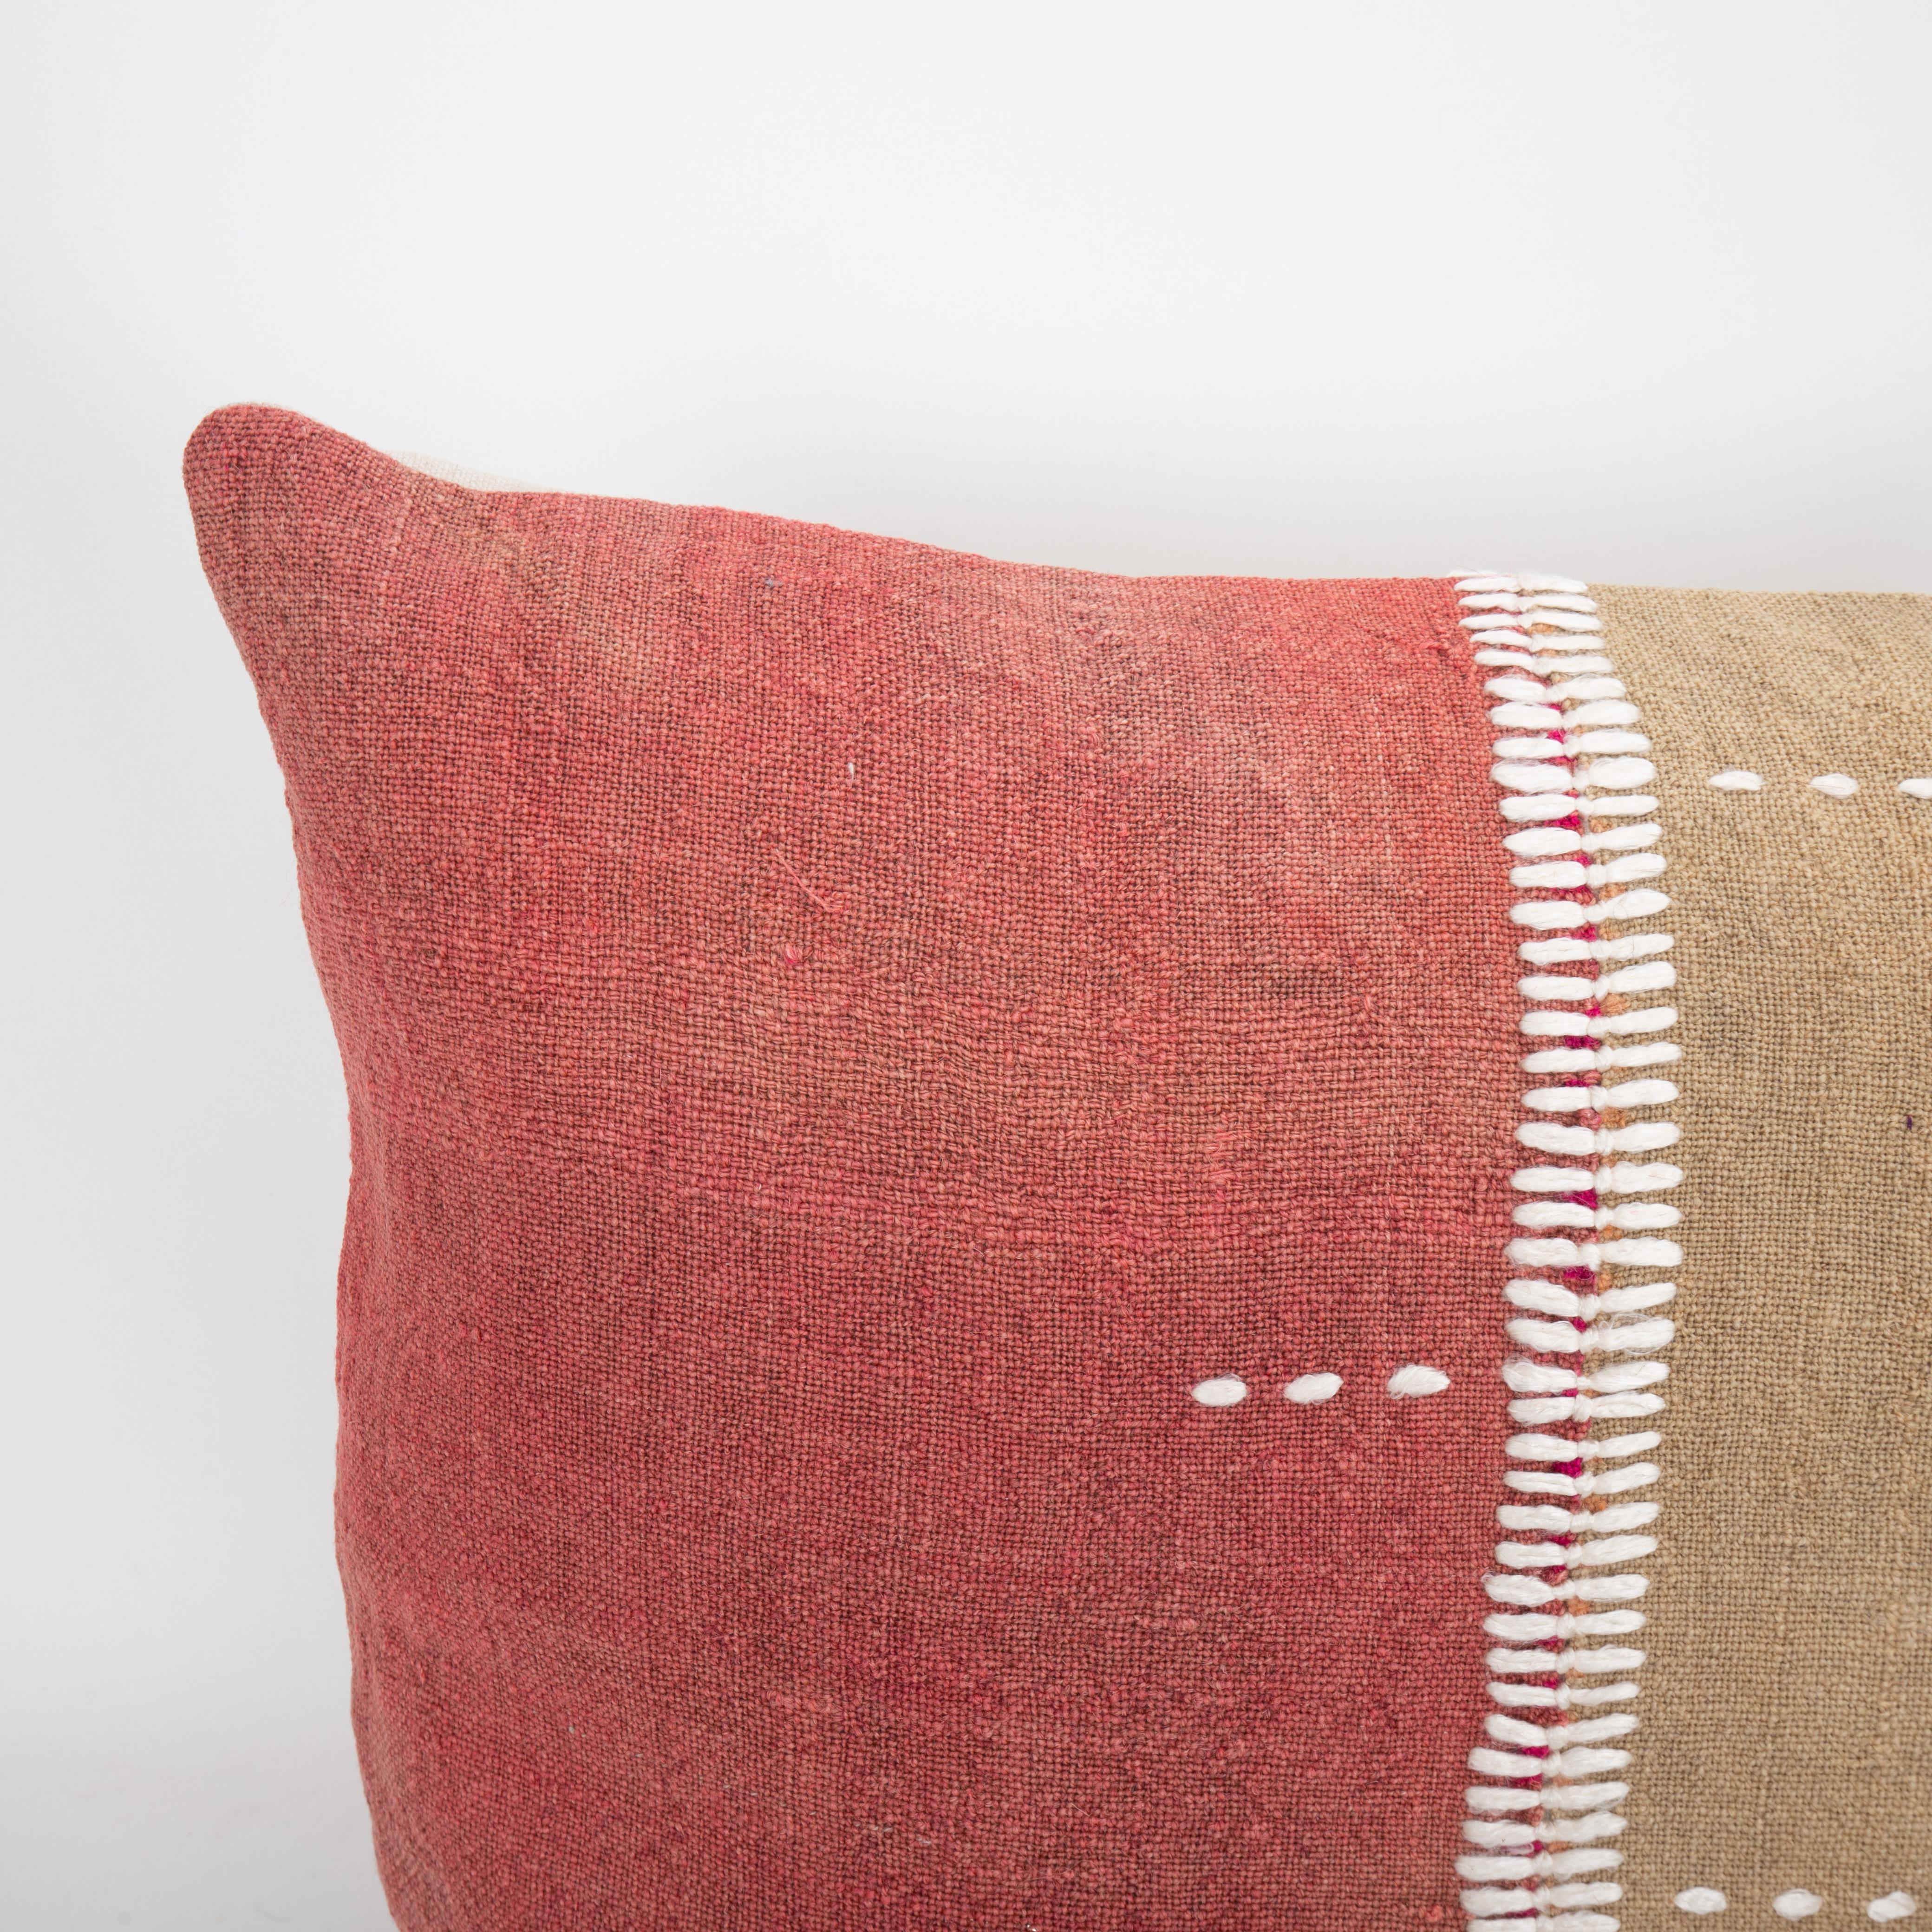 Kilim Pillowcase Made from an Eastern Anatolian Perde ‘ Cover’, Mid 20th C For Sale